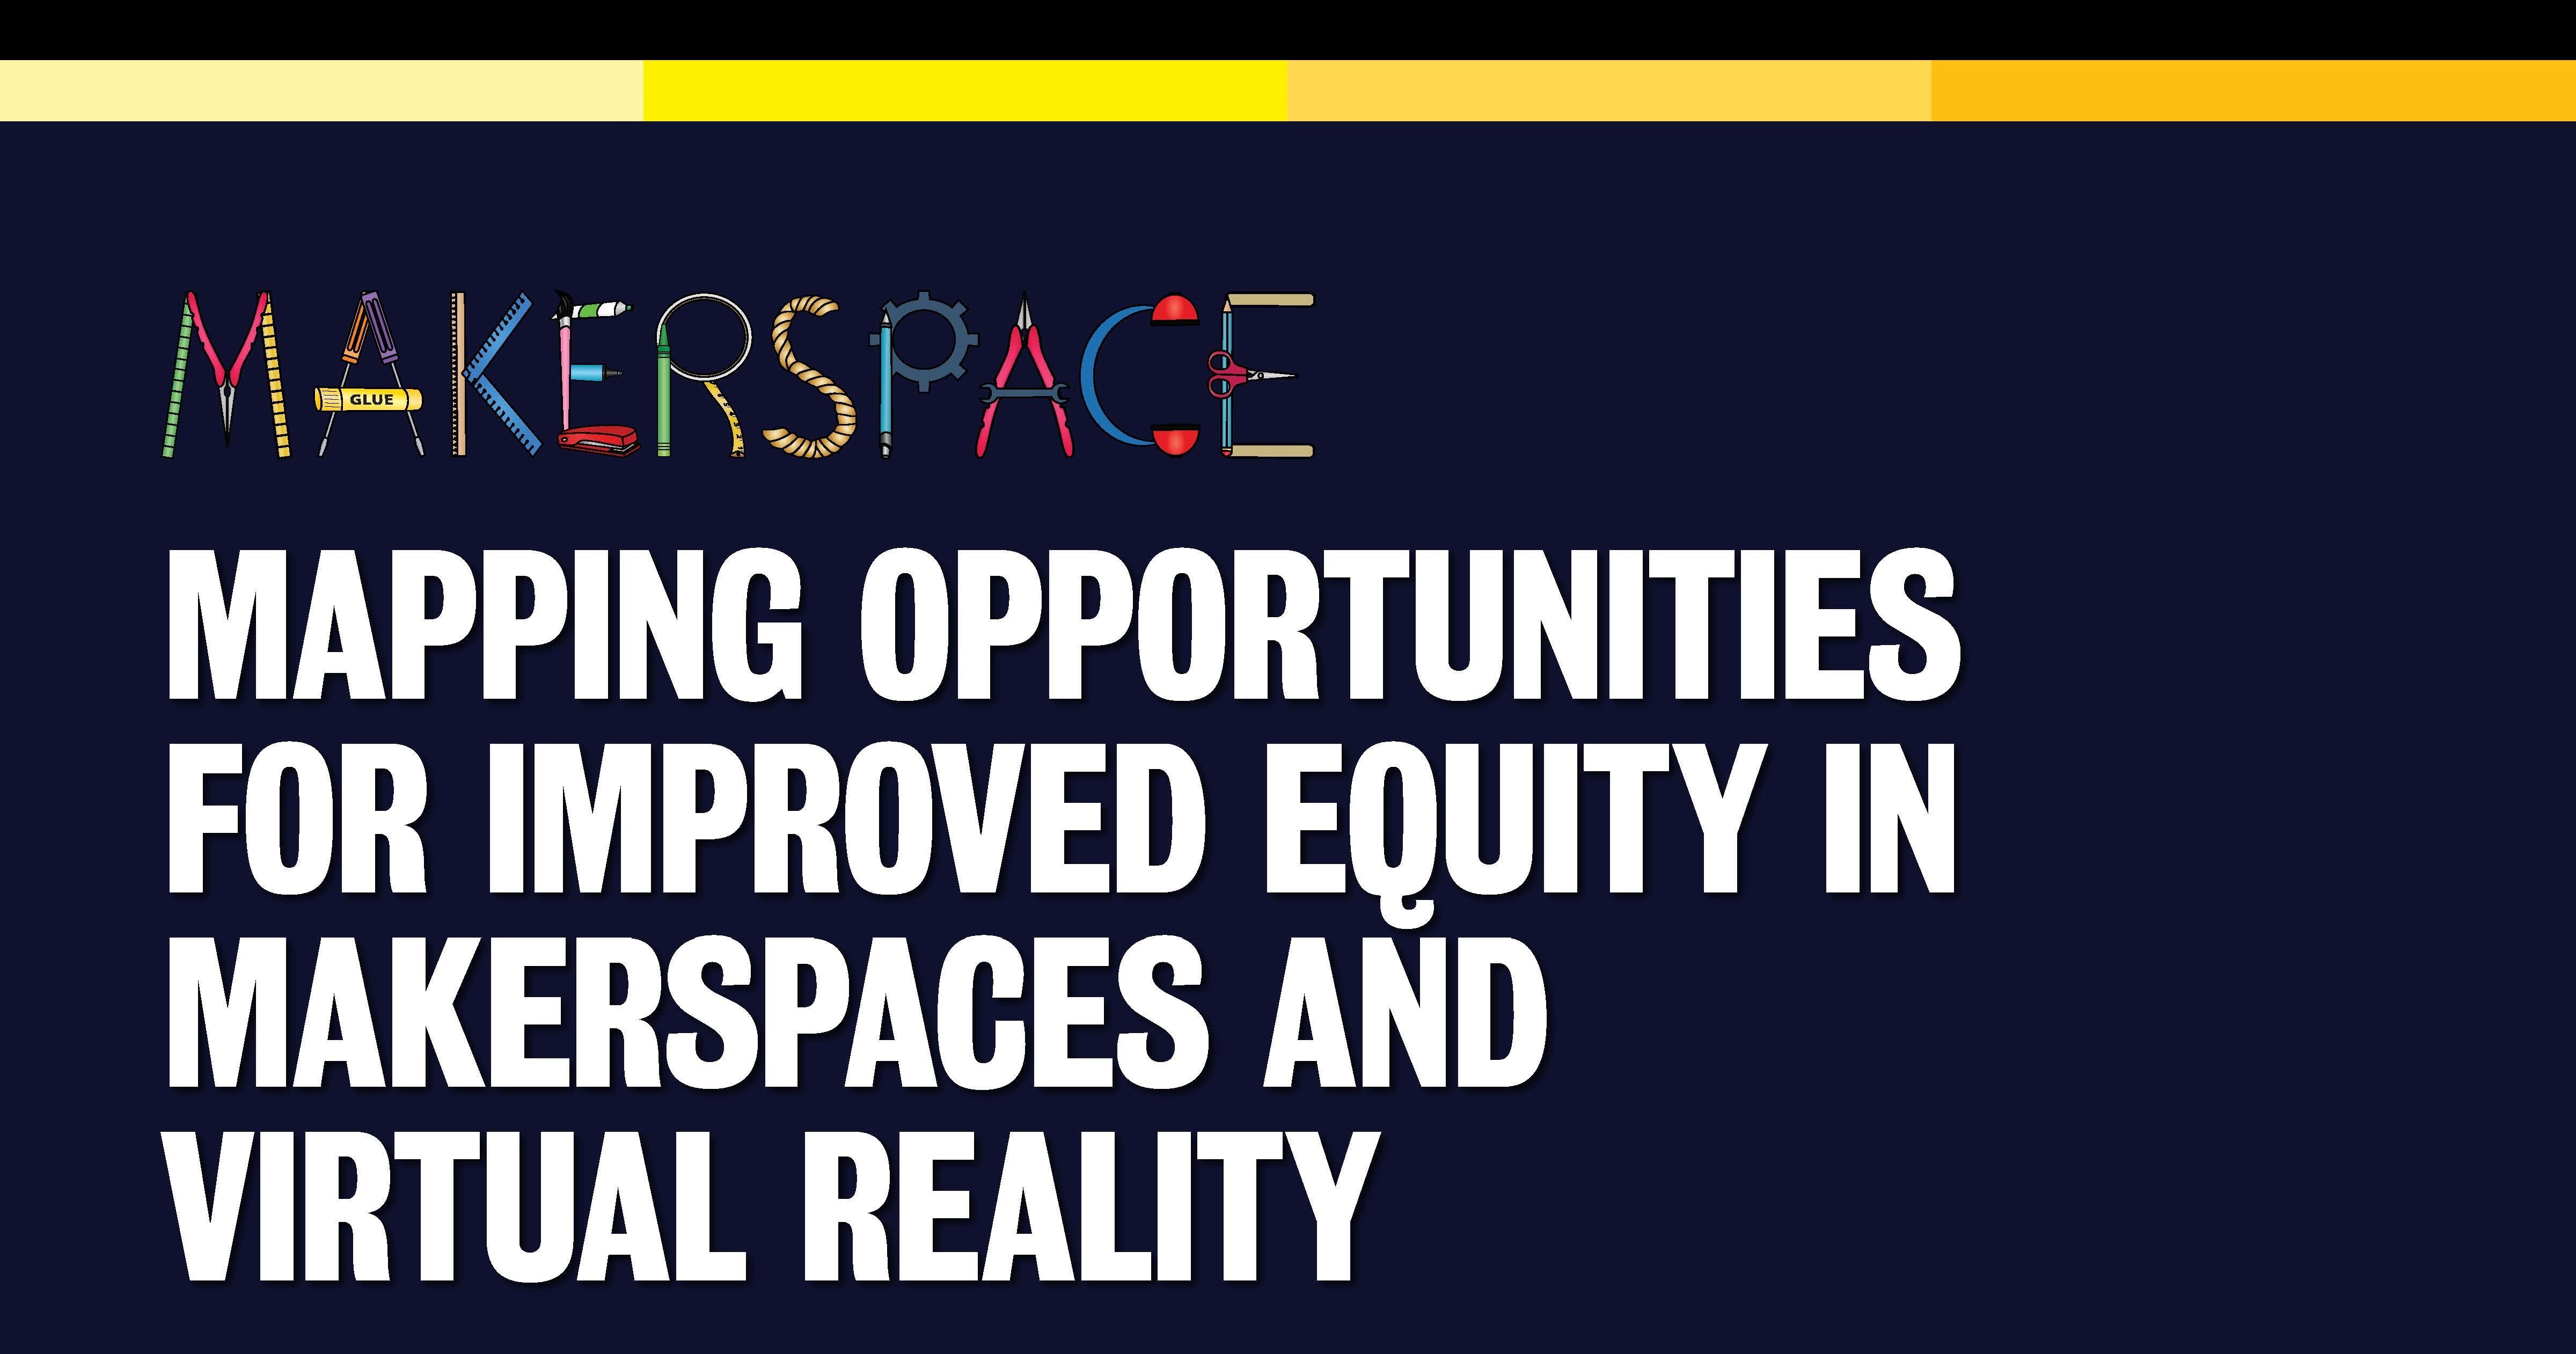 Makerspace Mapping Opportunities for Improved Equity in Makerspaces and Virtual Reality poster title